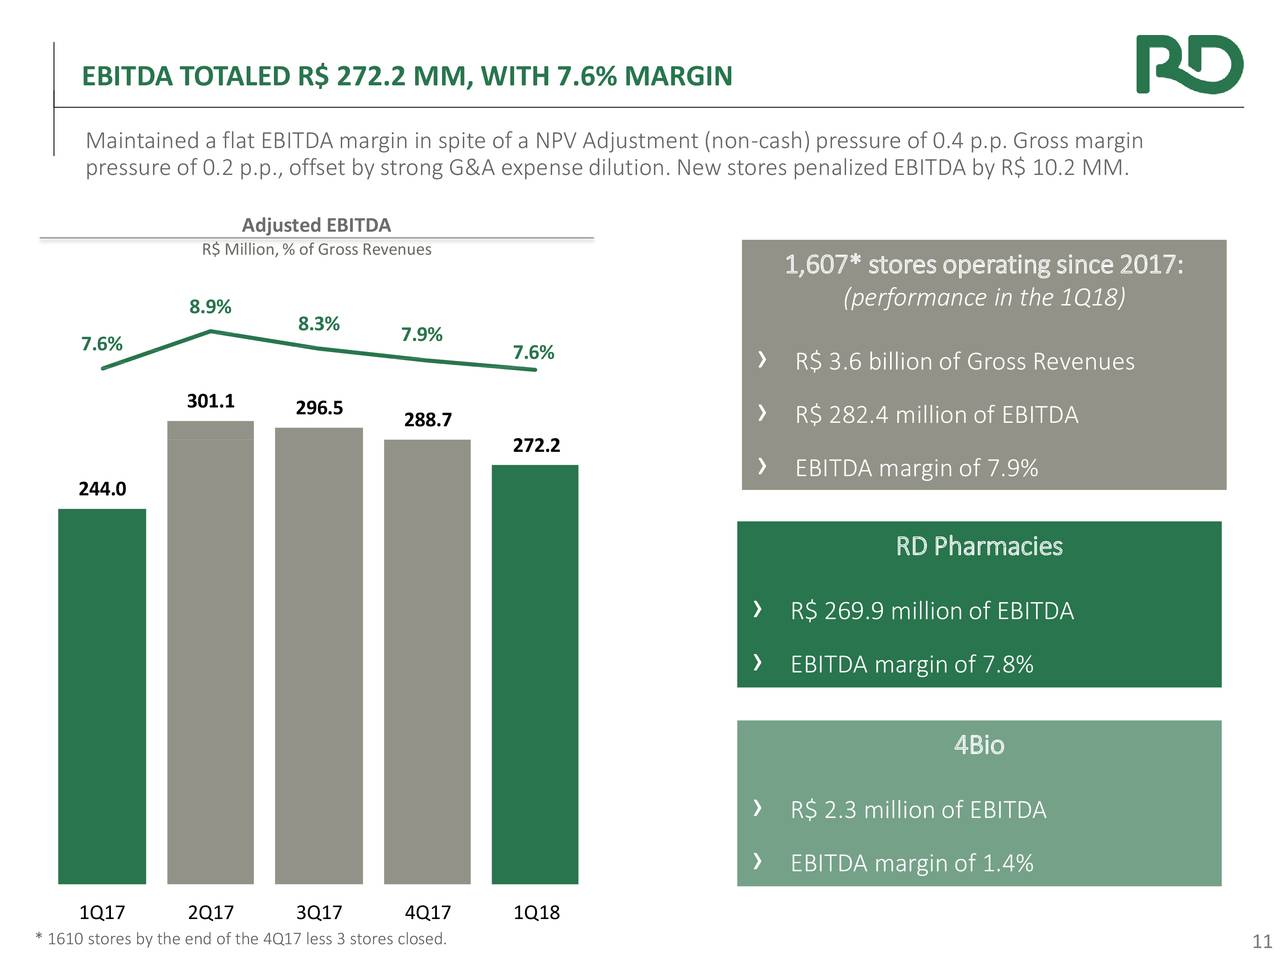 EBITDA TOTALED R$ 272.2 MM, WITH 7.6% MARGIN